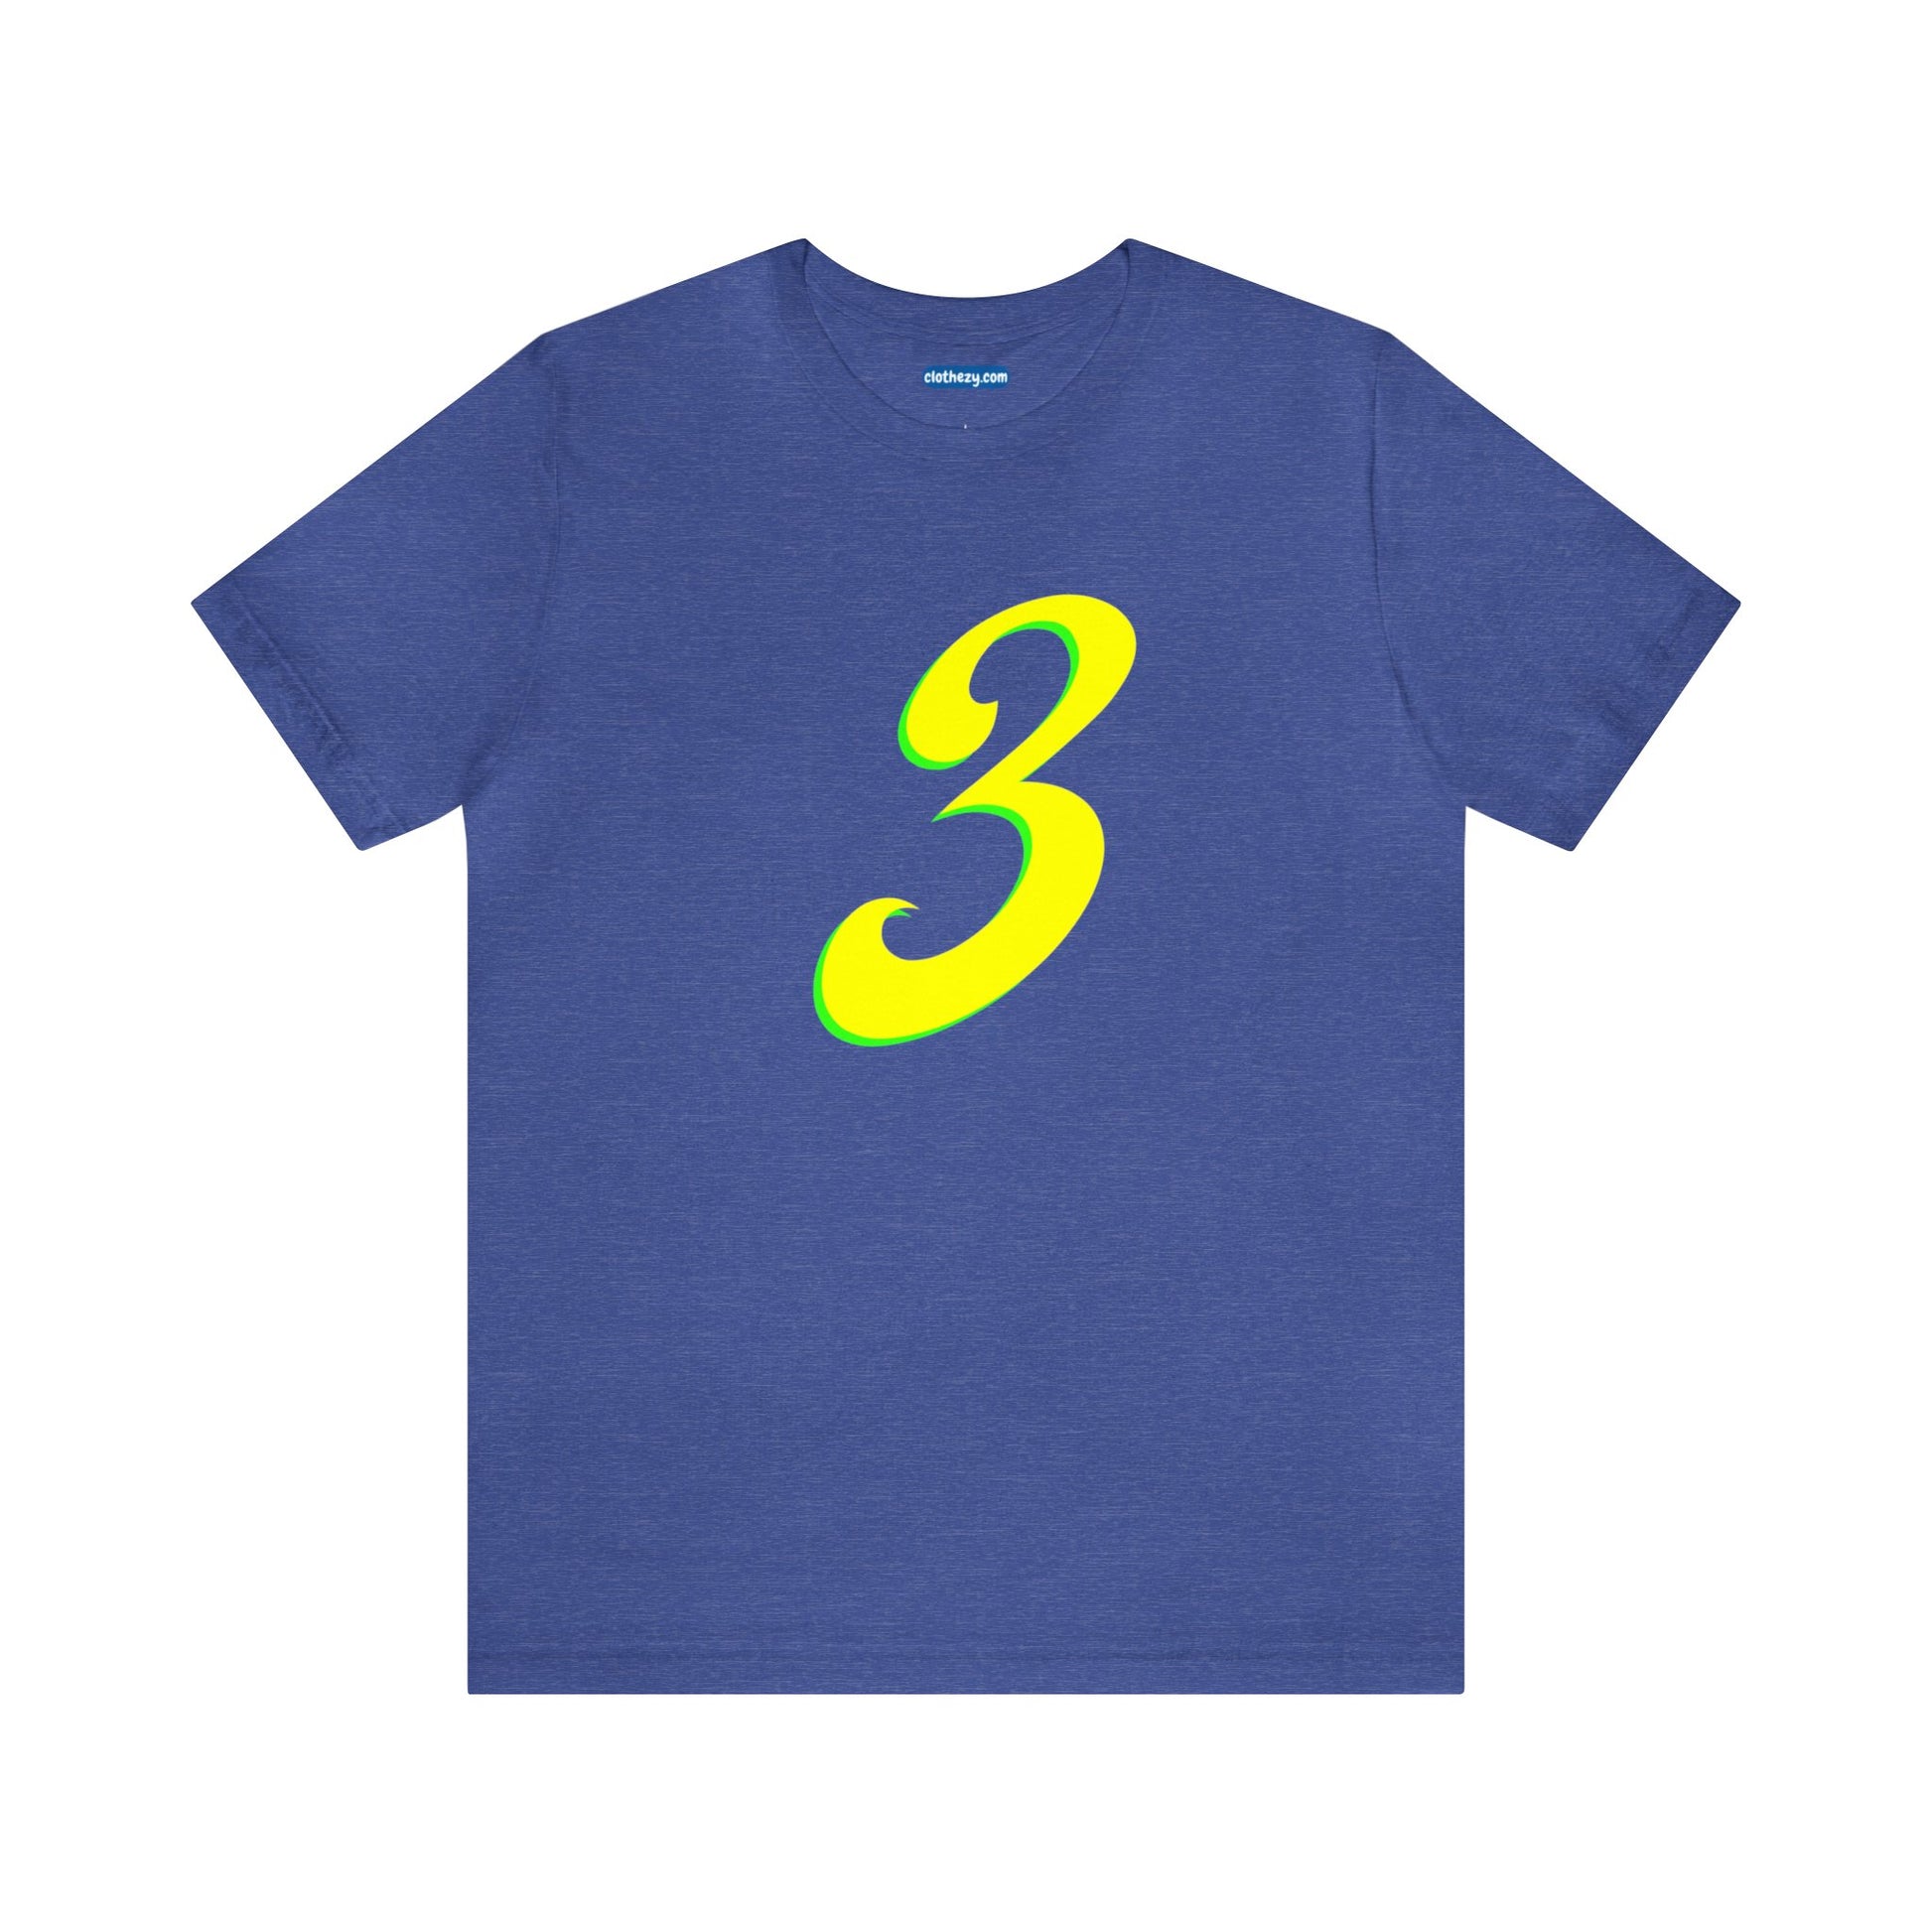 Number 3 Design - Soft Cotton Tee for birthdays and celebrations, Gift for friends and family, Multiple Options by clothezy.com in Navy Size Small - Buy Now